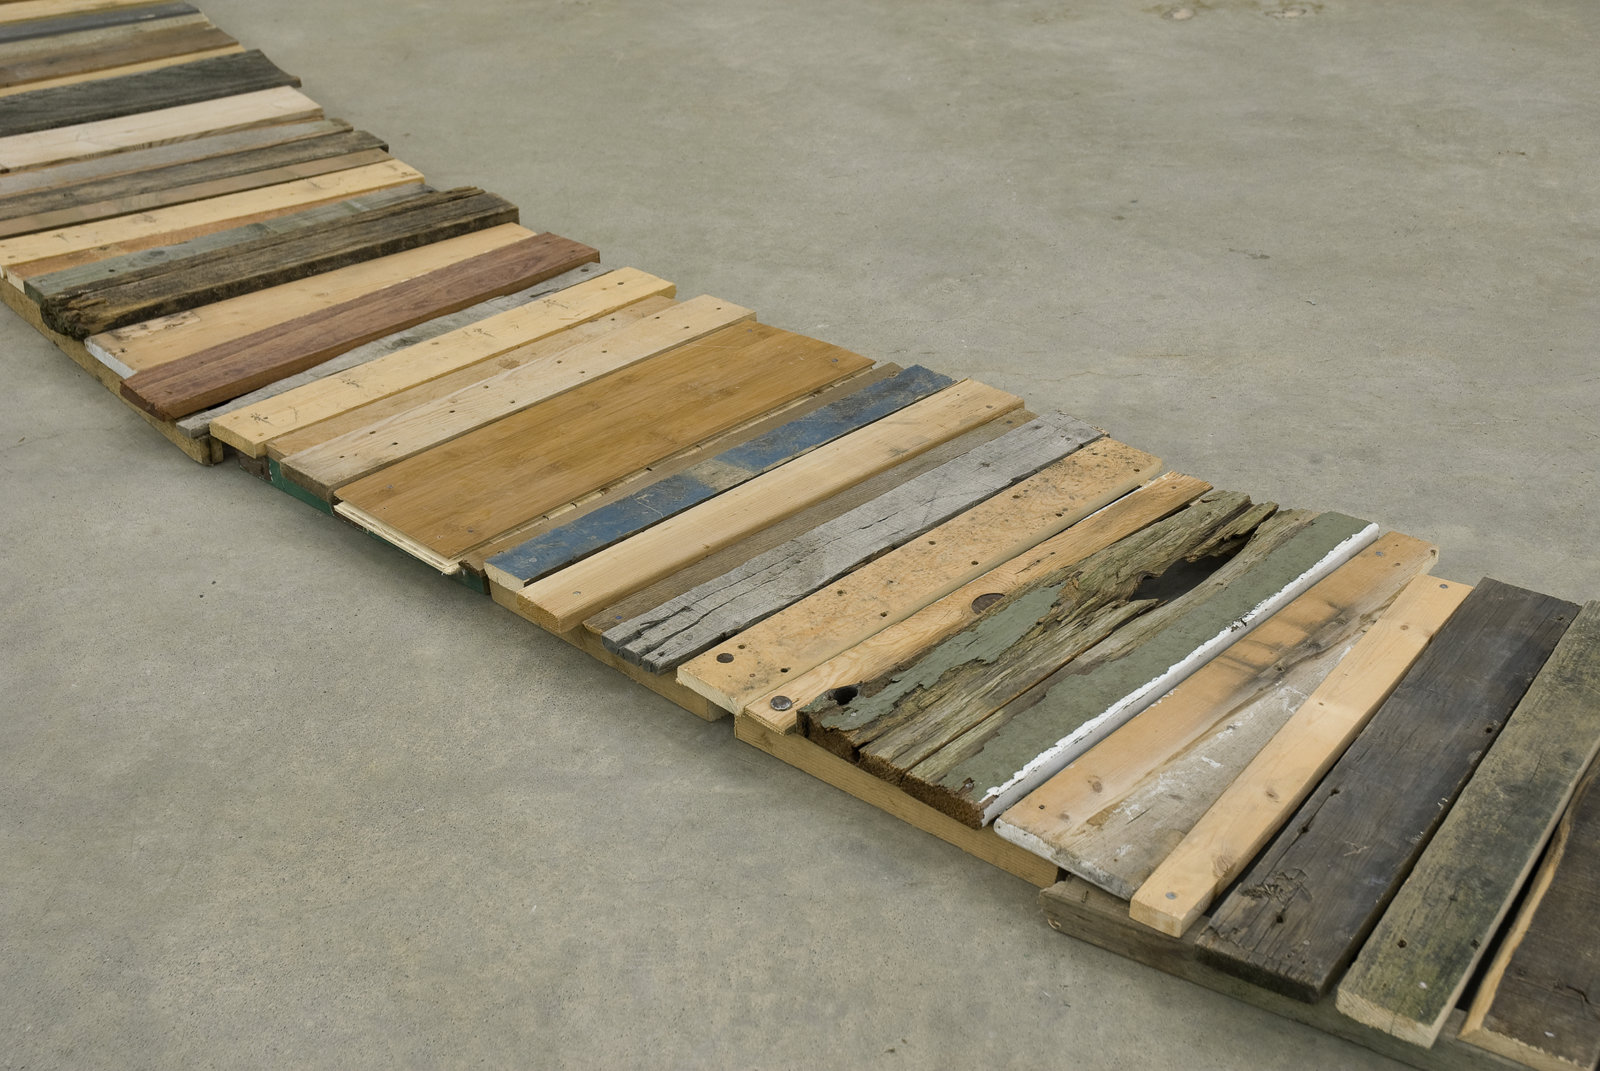 Ashes Withyman, A Most Elastic Road from Uncertain Pilgrimage (detail), 2009, found wood, found nails, 276 x 44 x 3 in. (701 x 112 x 6 cm)